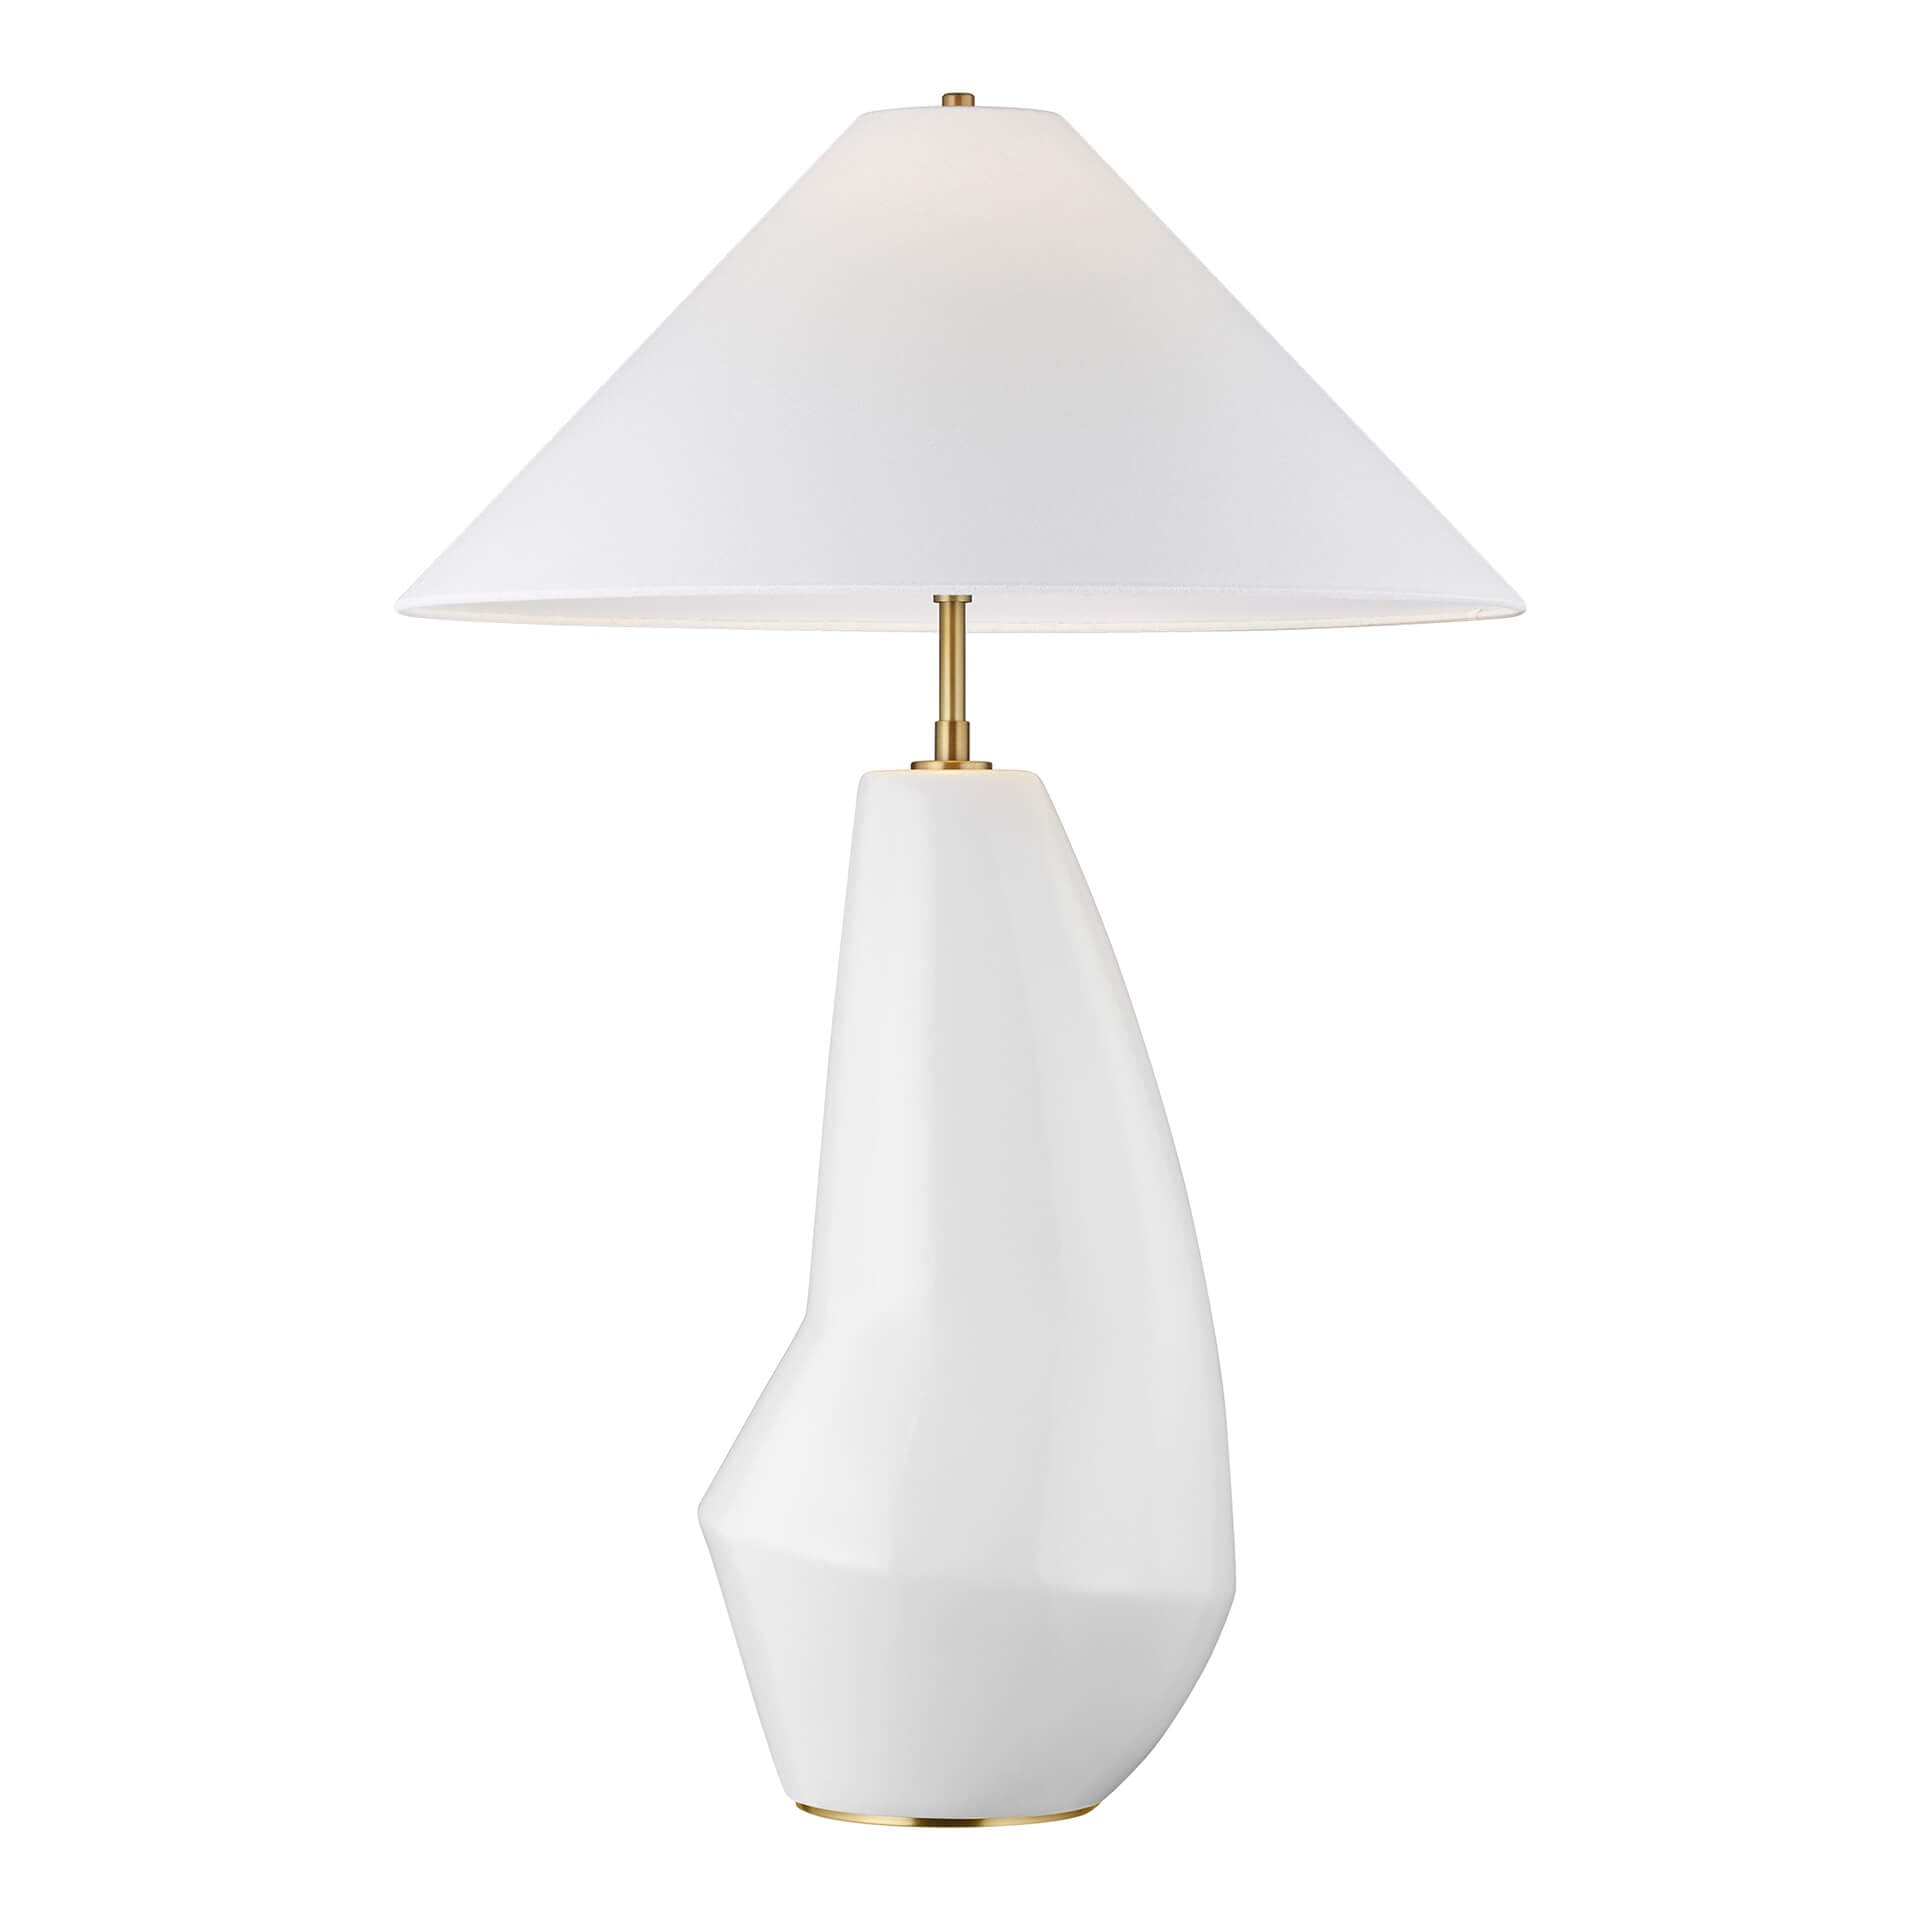 Contour Table Lamp - Tall